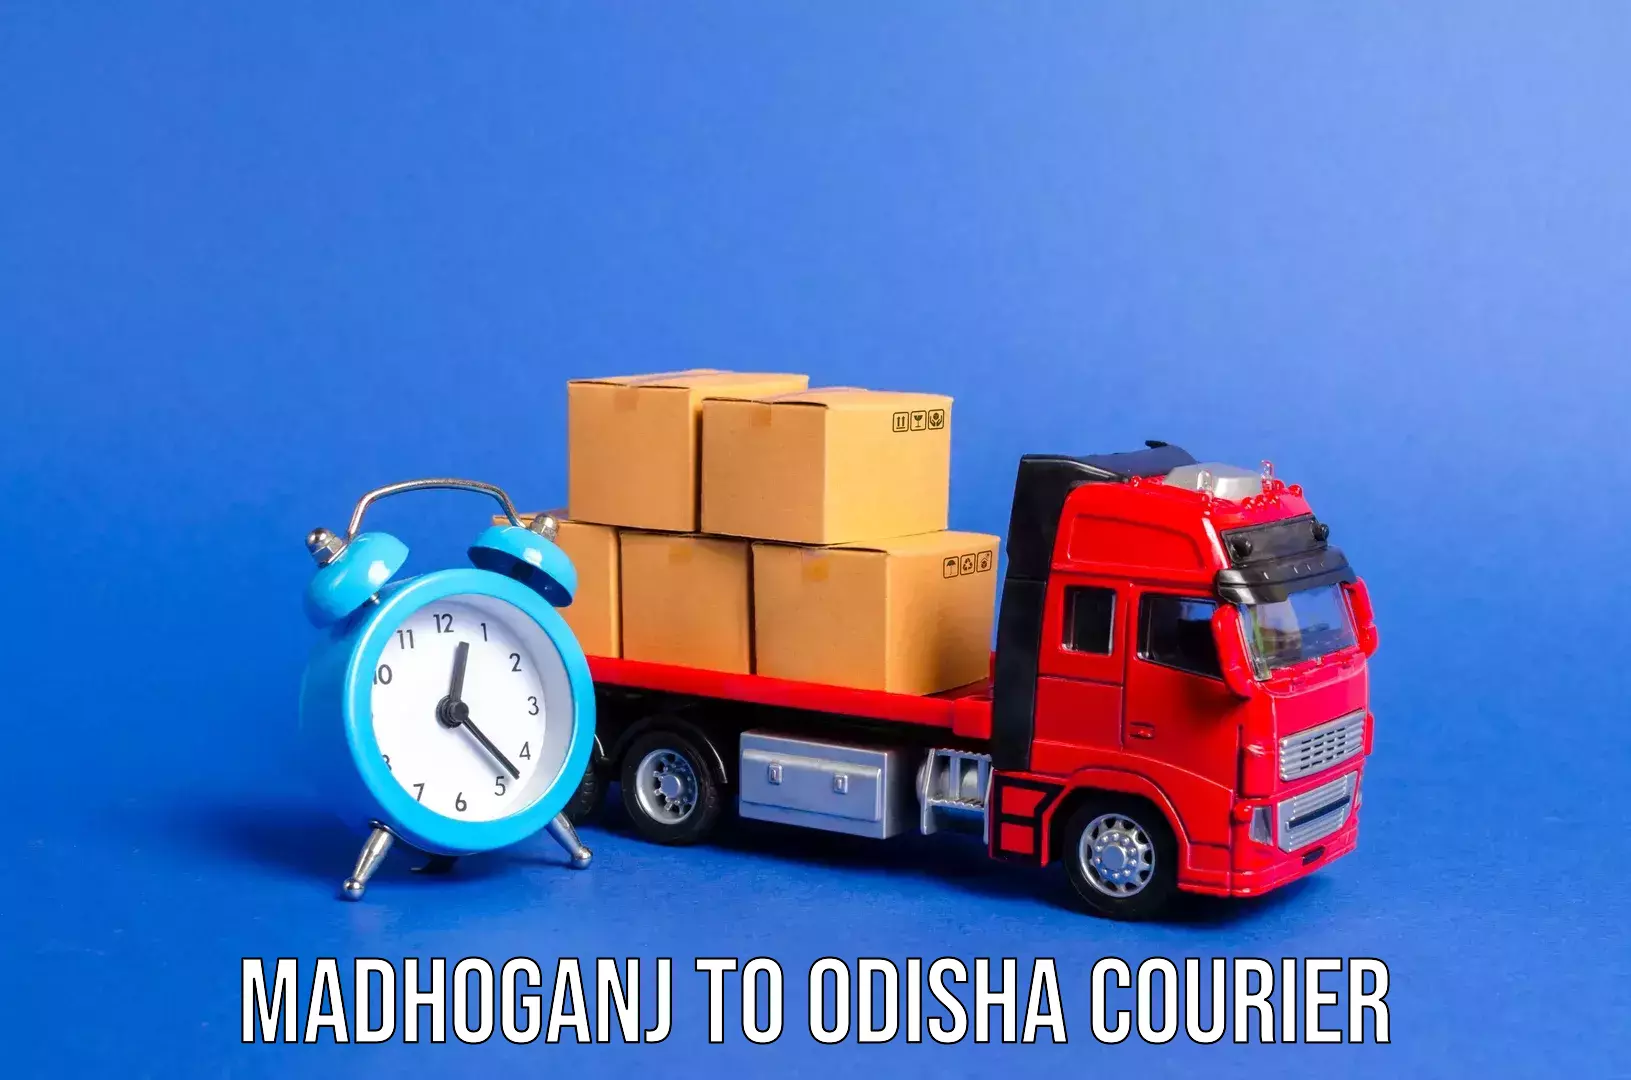 Personal luggage delivery in Madhoganj to Kuchinda